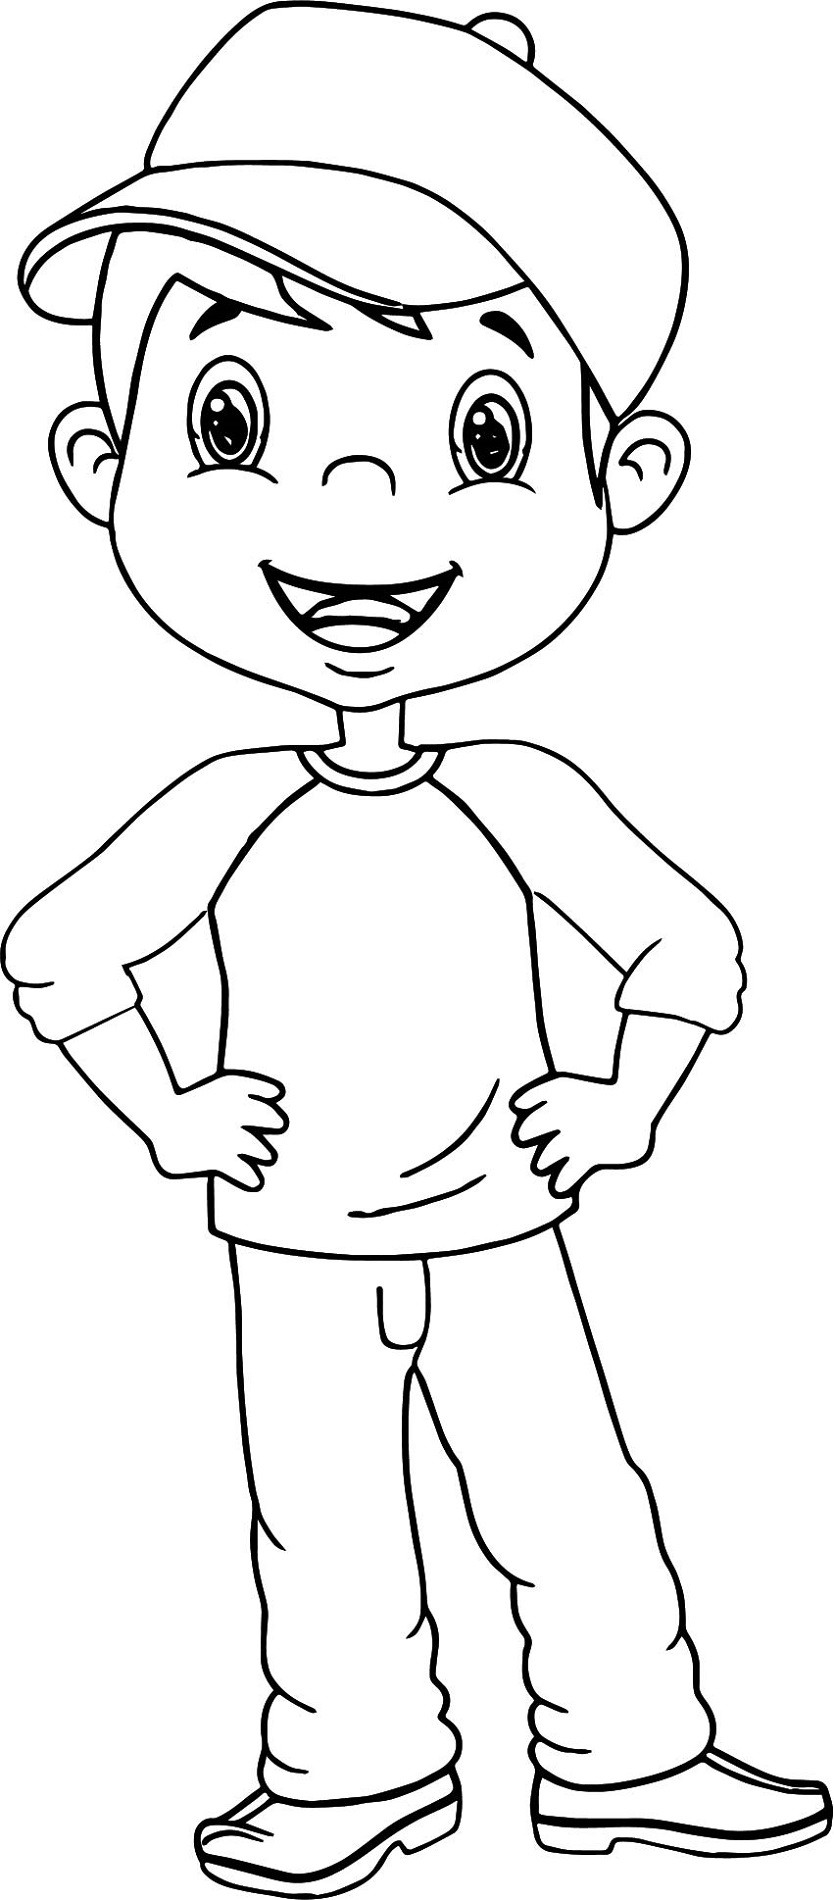 Coloring Sheets For Boys And Girl
 Cartoon Characters Coloring Pages line Printable